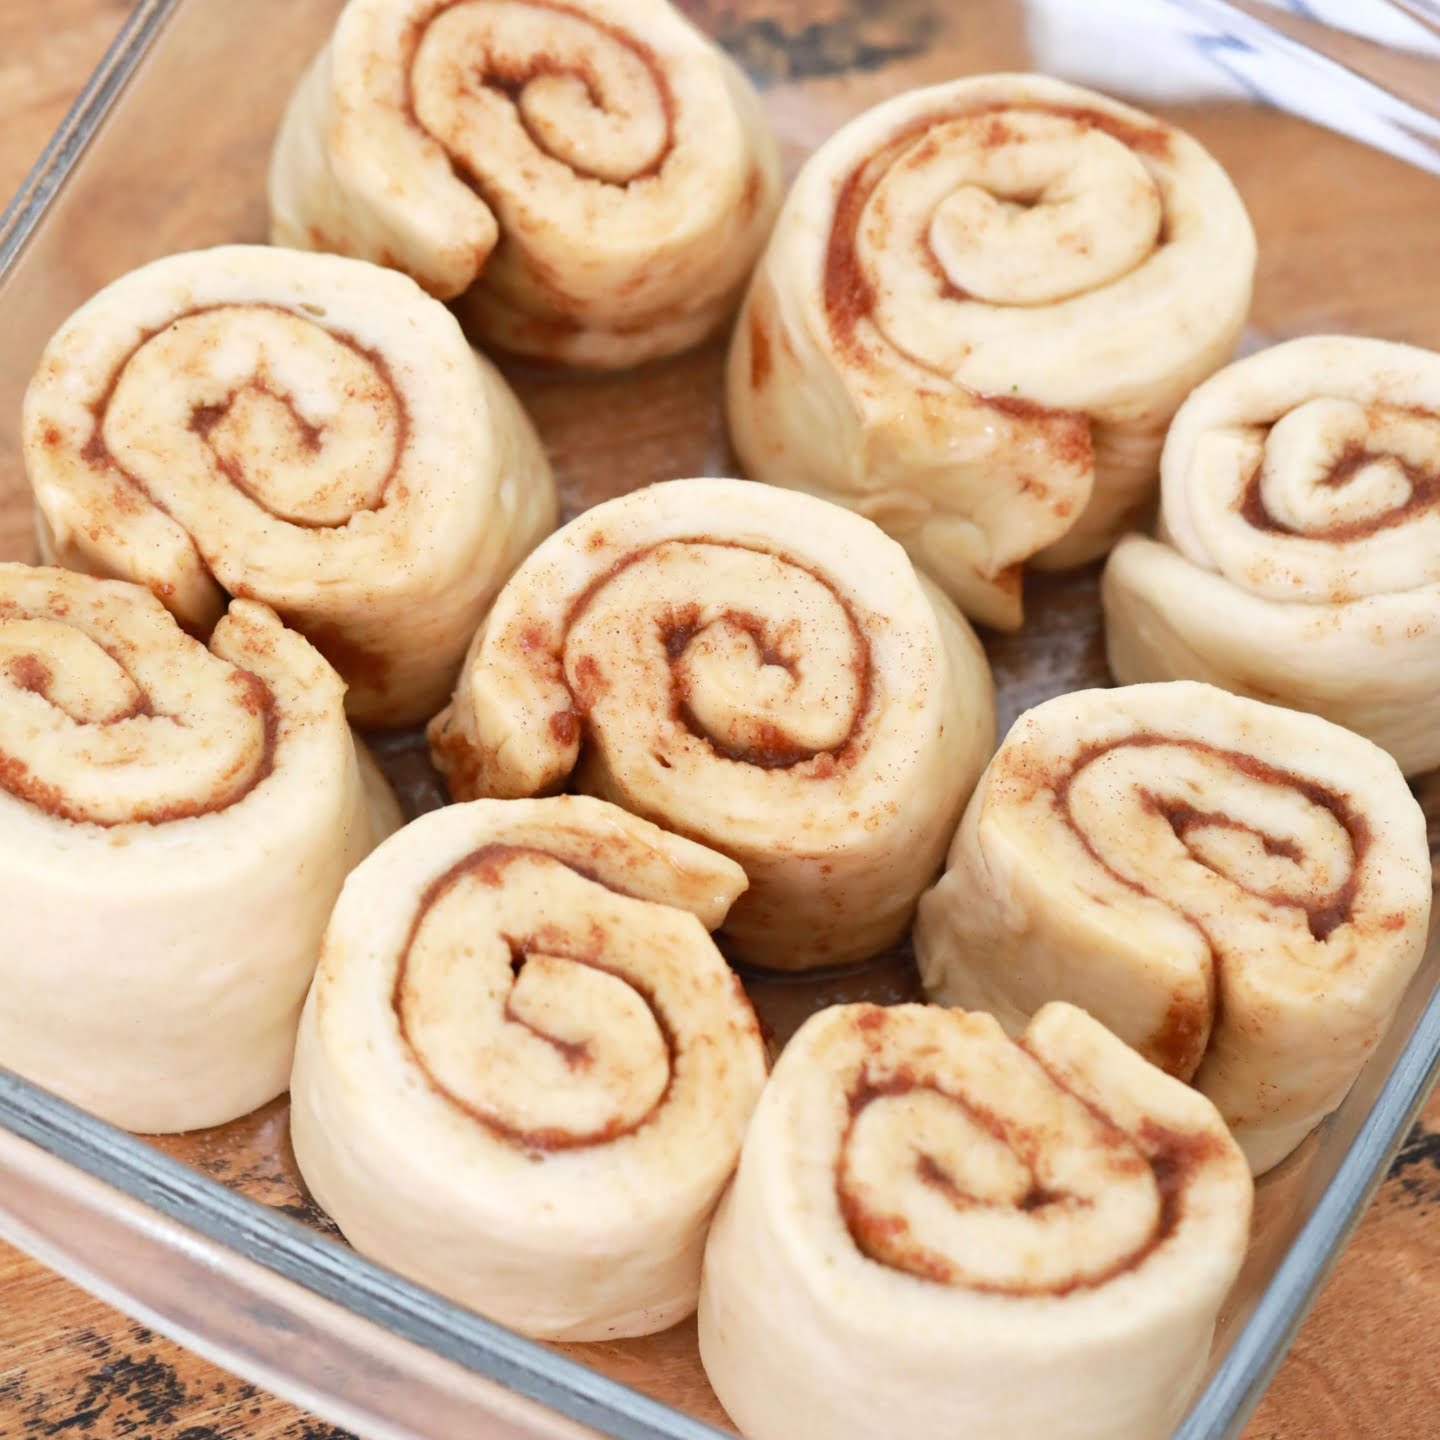 Place the sliced rolls in your prepared baking dishes